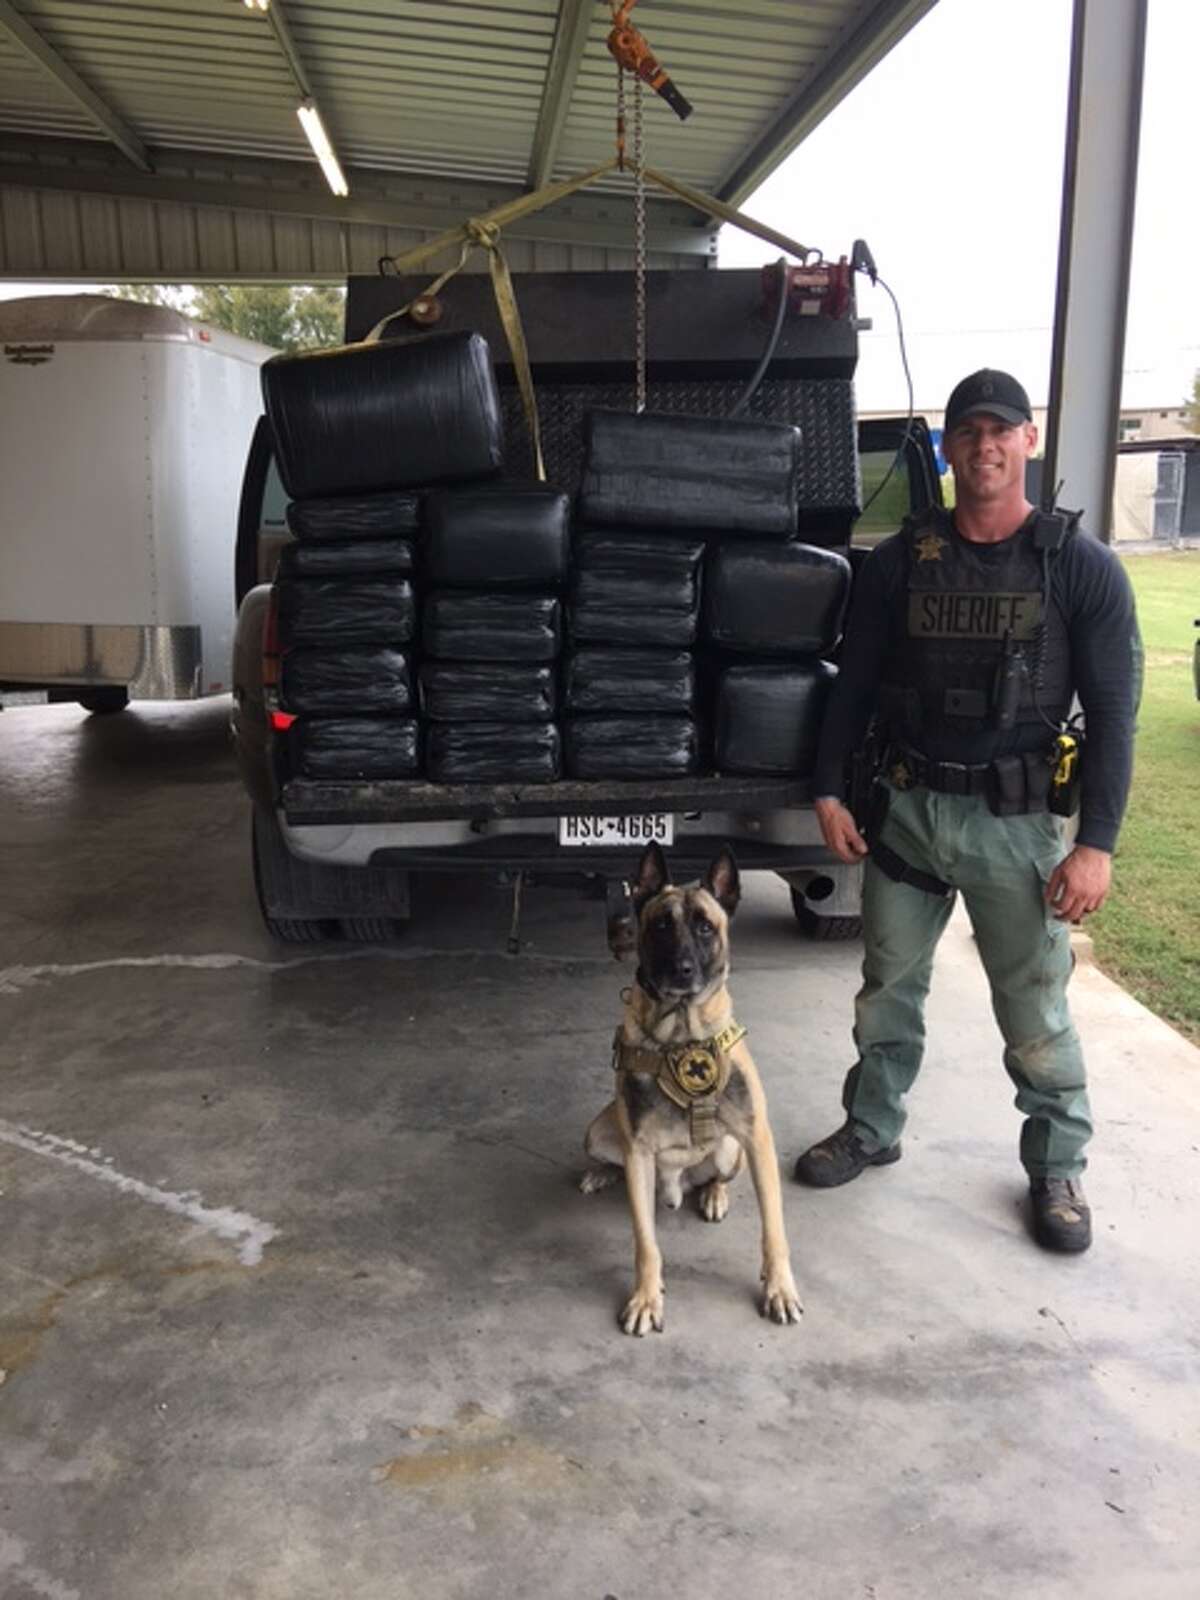 More than 400 pounds of marijuana, with an estimated worth of $234,000, was pulled from a pickup truck's auxiliary fuel tank by the Fayette County Sheriffs Office on Nov. 4, 2016, according to a news release.